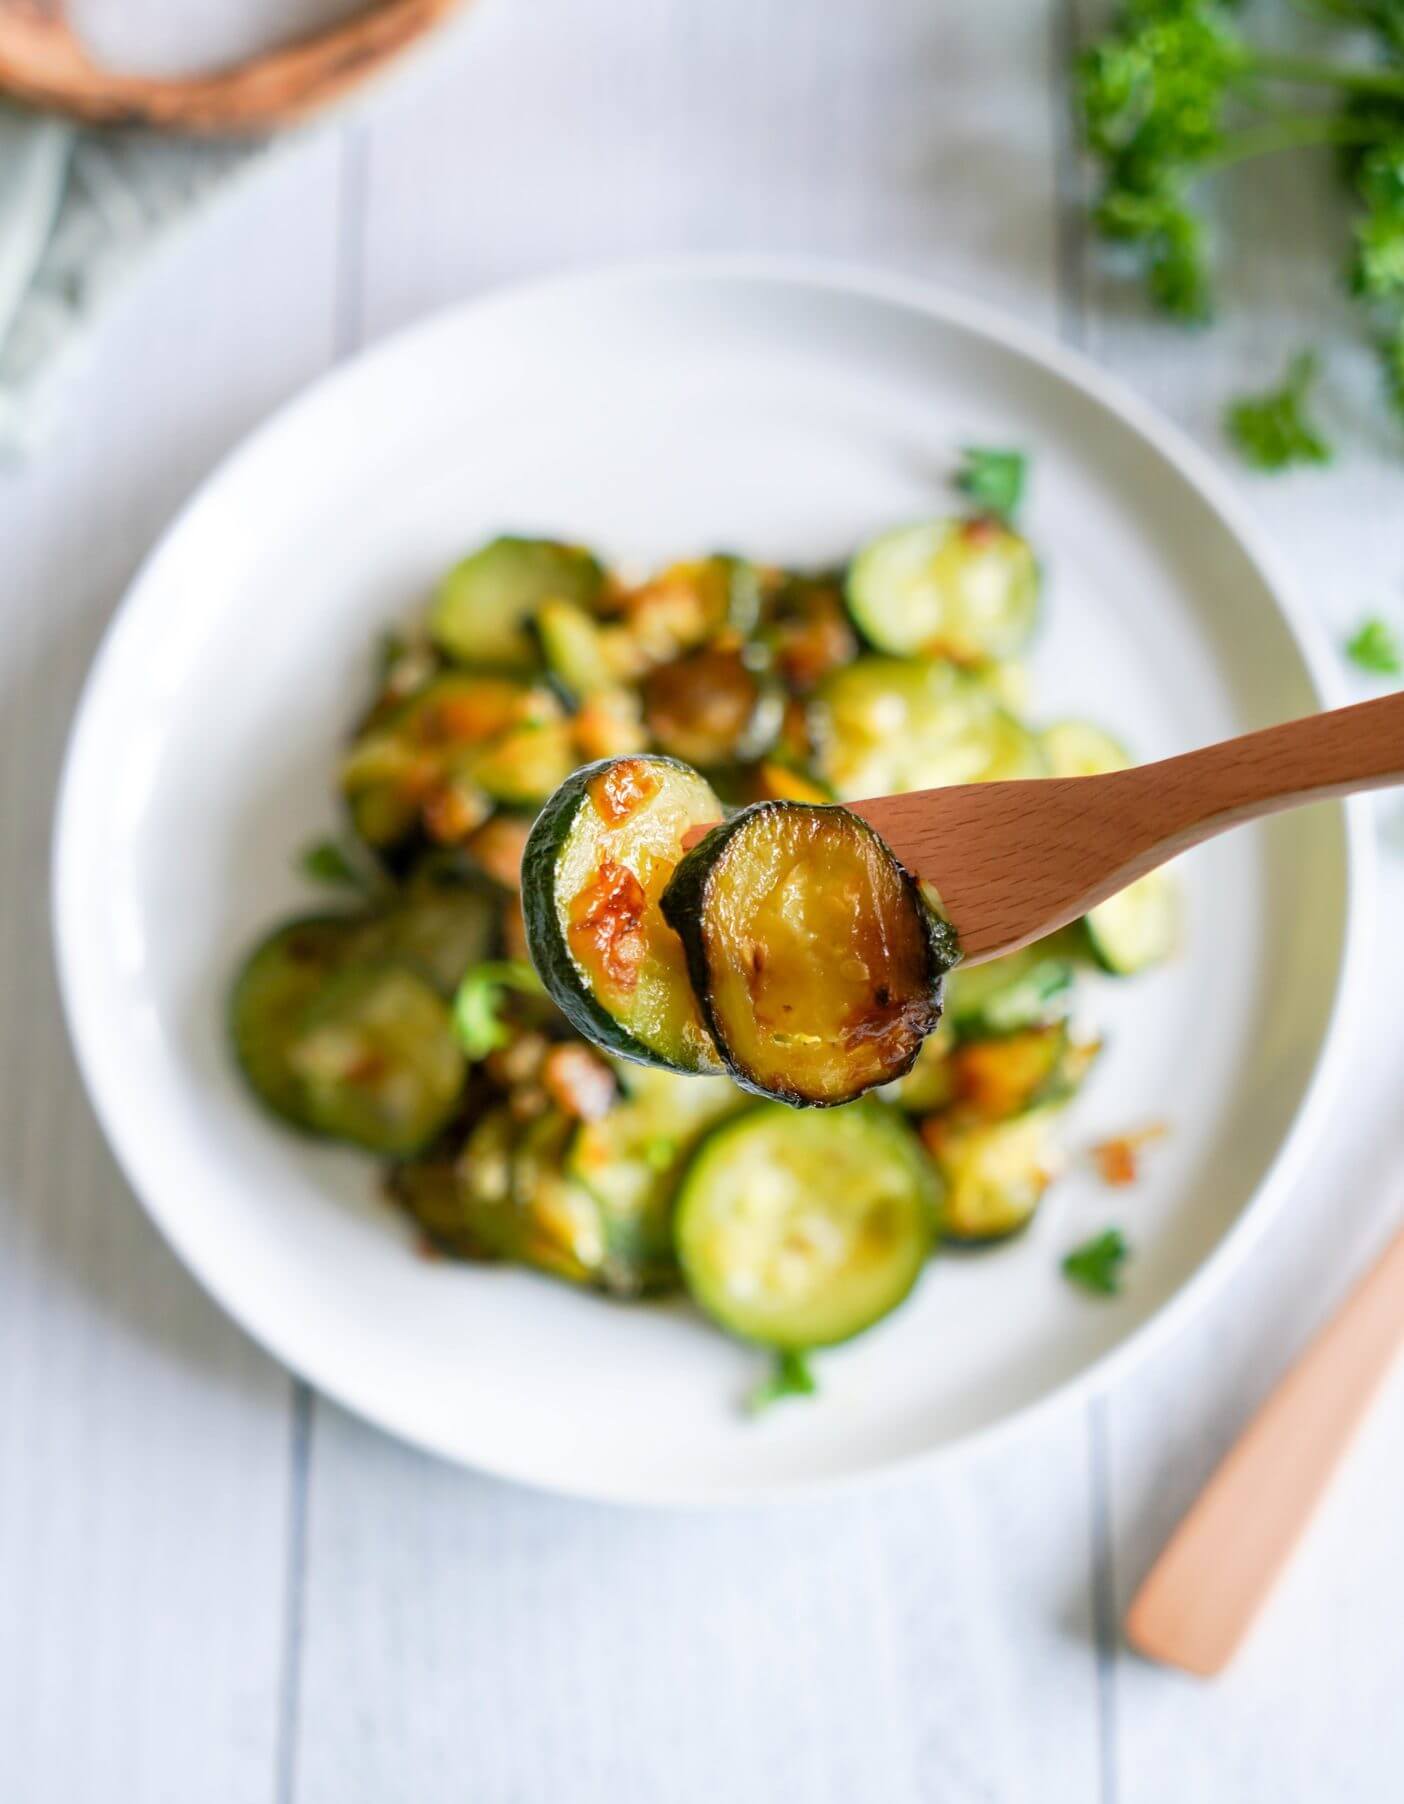 sauteed-zucchini-with-onion-on-a-fork-with-a-plate-of-more-zucchini-in-the-background